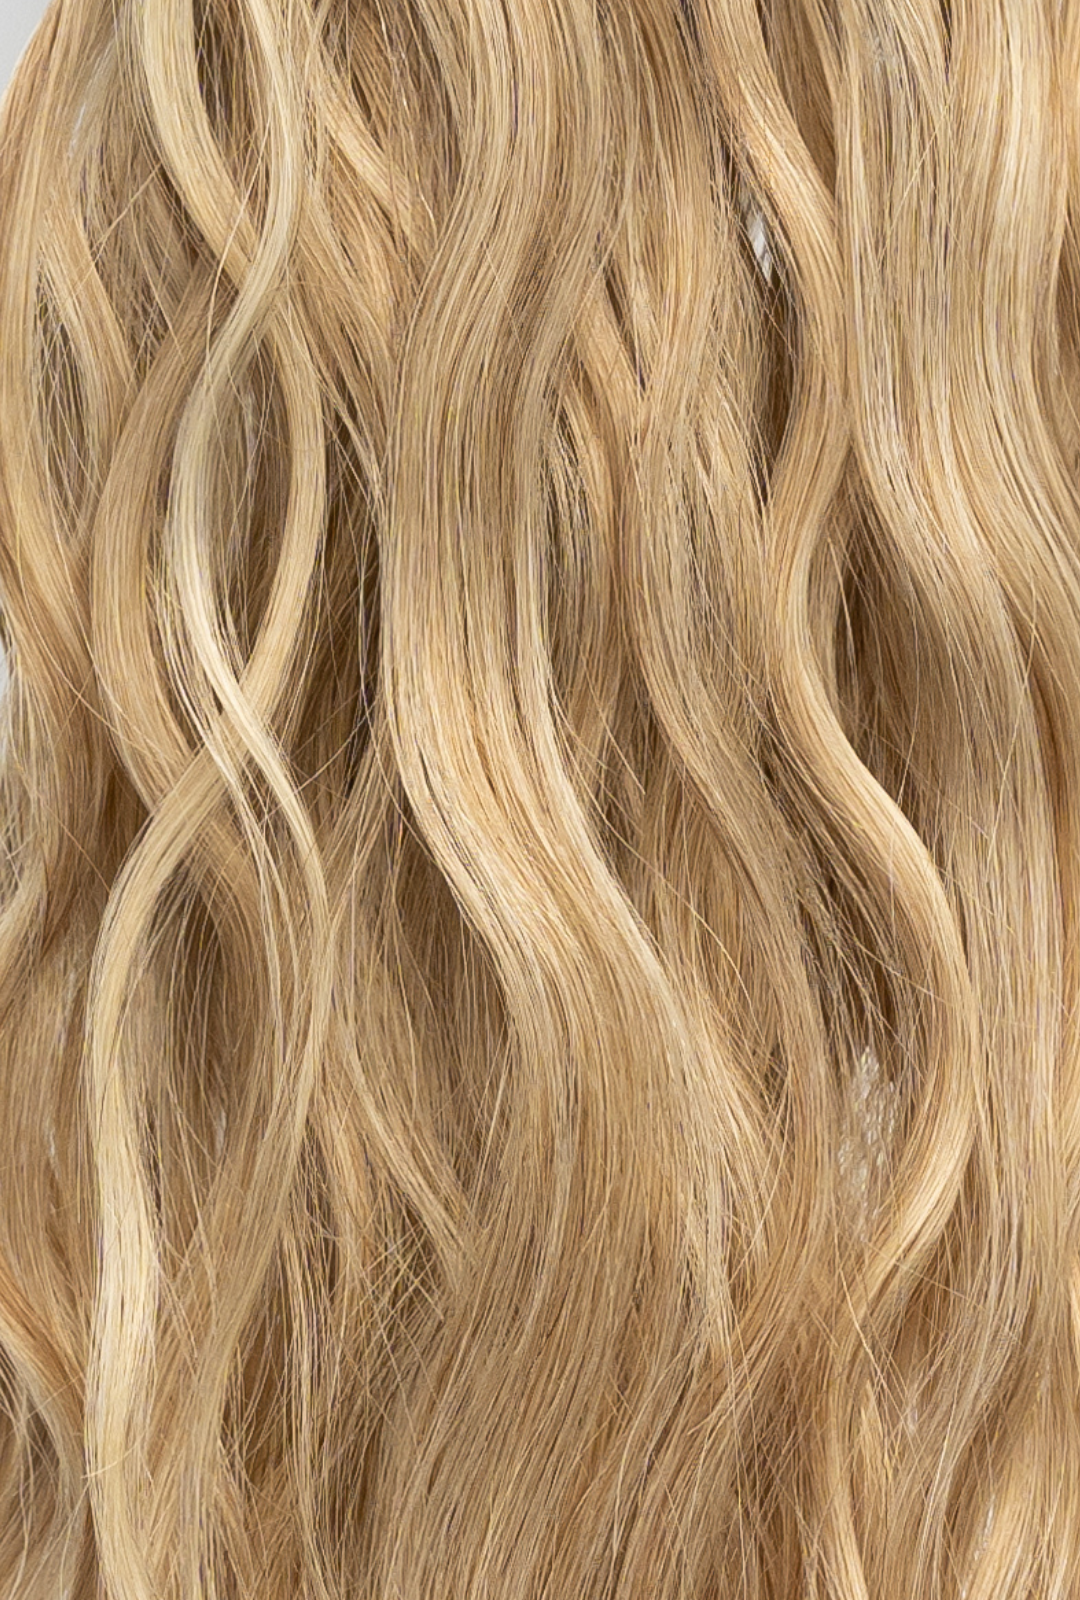 Waved by Laced Hair Hand Tied Weft Extensions Dimensional #10/16